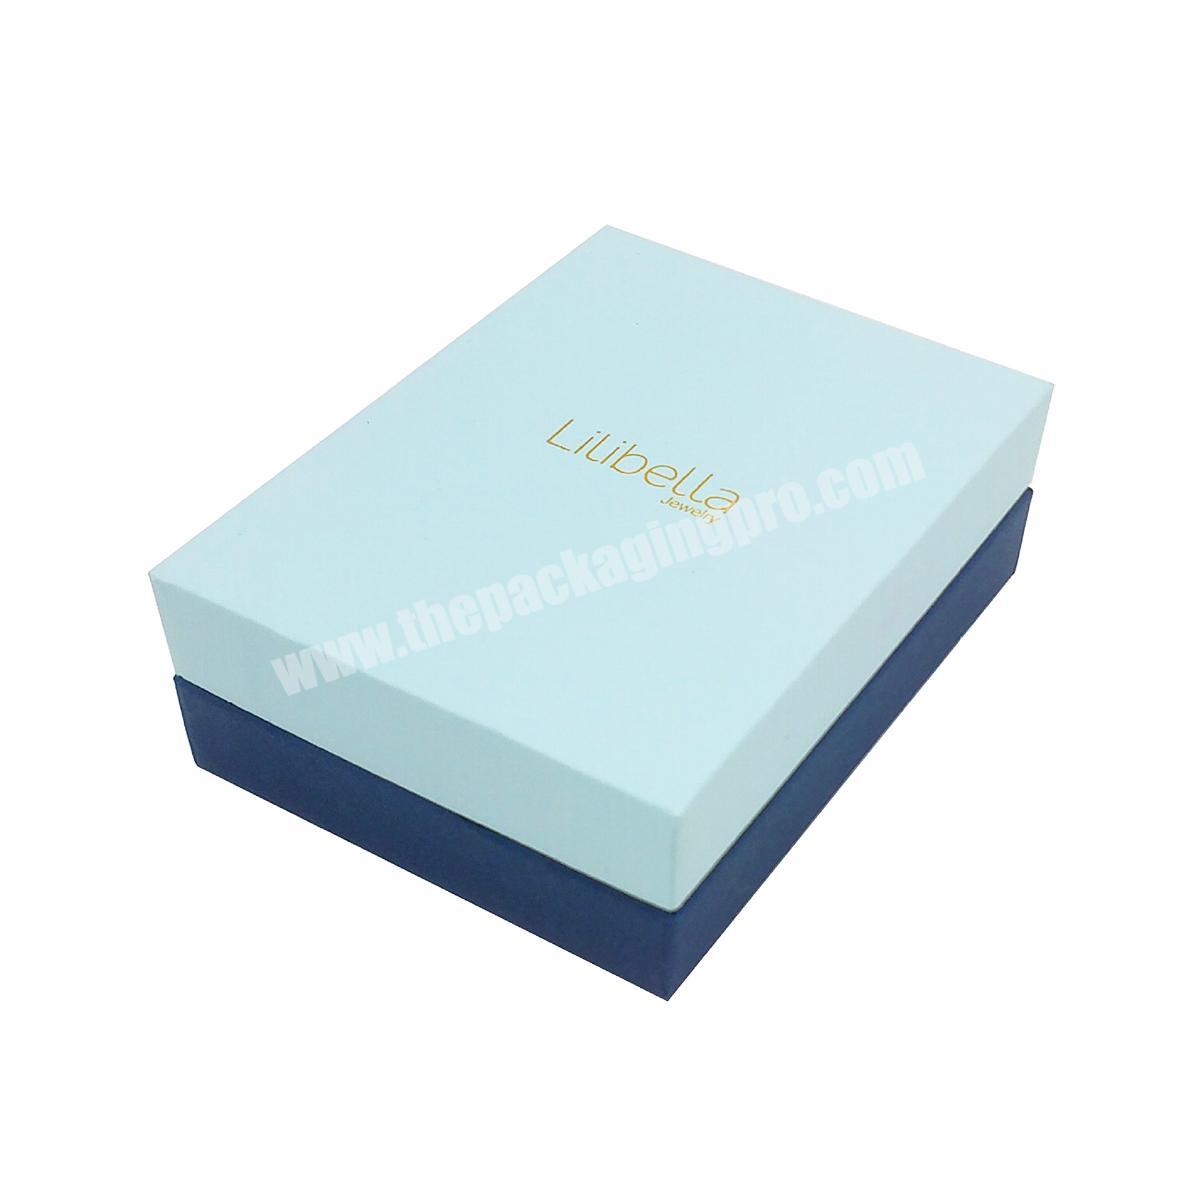 candle ever plain envelope box packaging gift italia retail box packaging